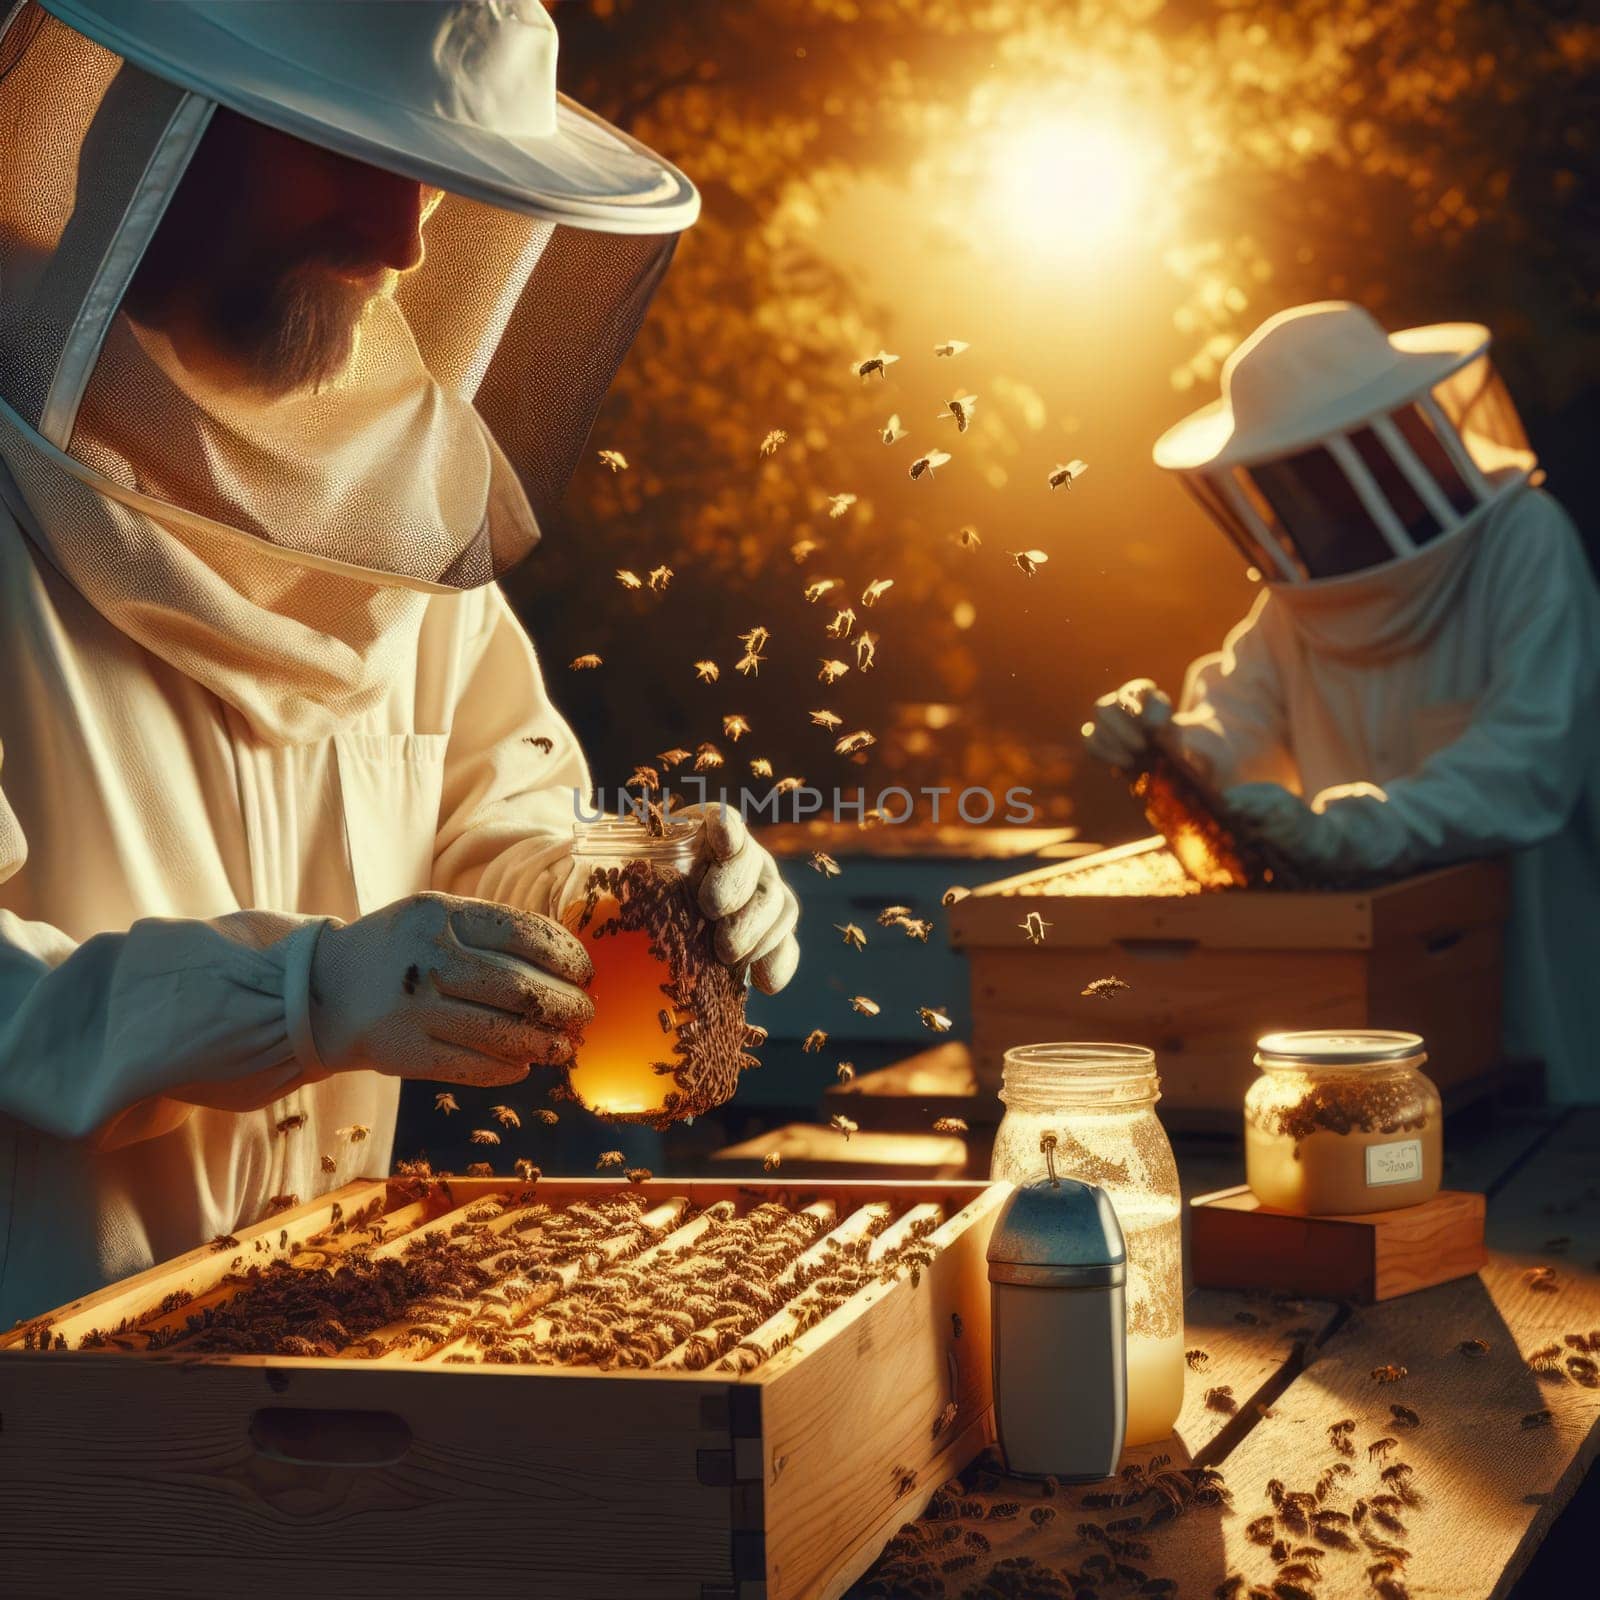 Two beekeepers working with a beehive in beautiful golden light, wearing protective suits and surrounded by bees